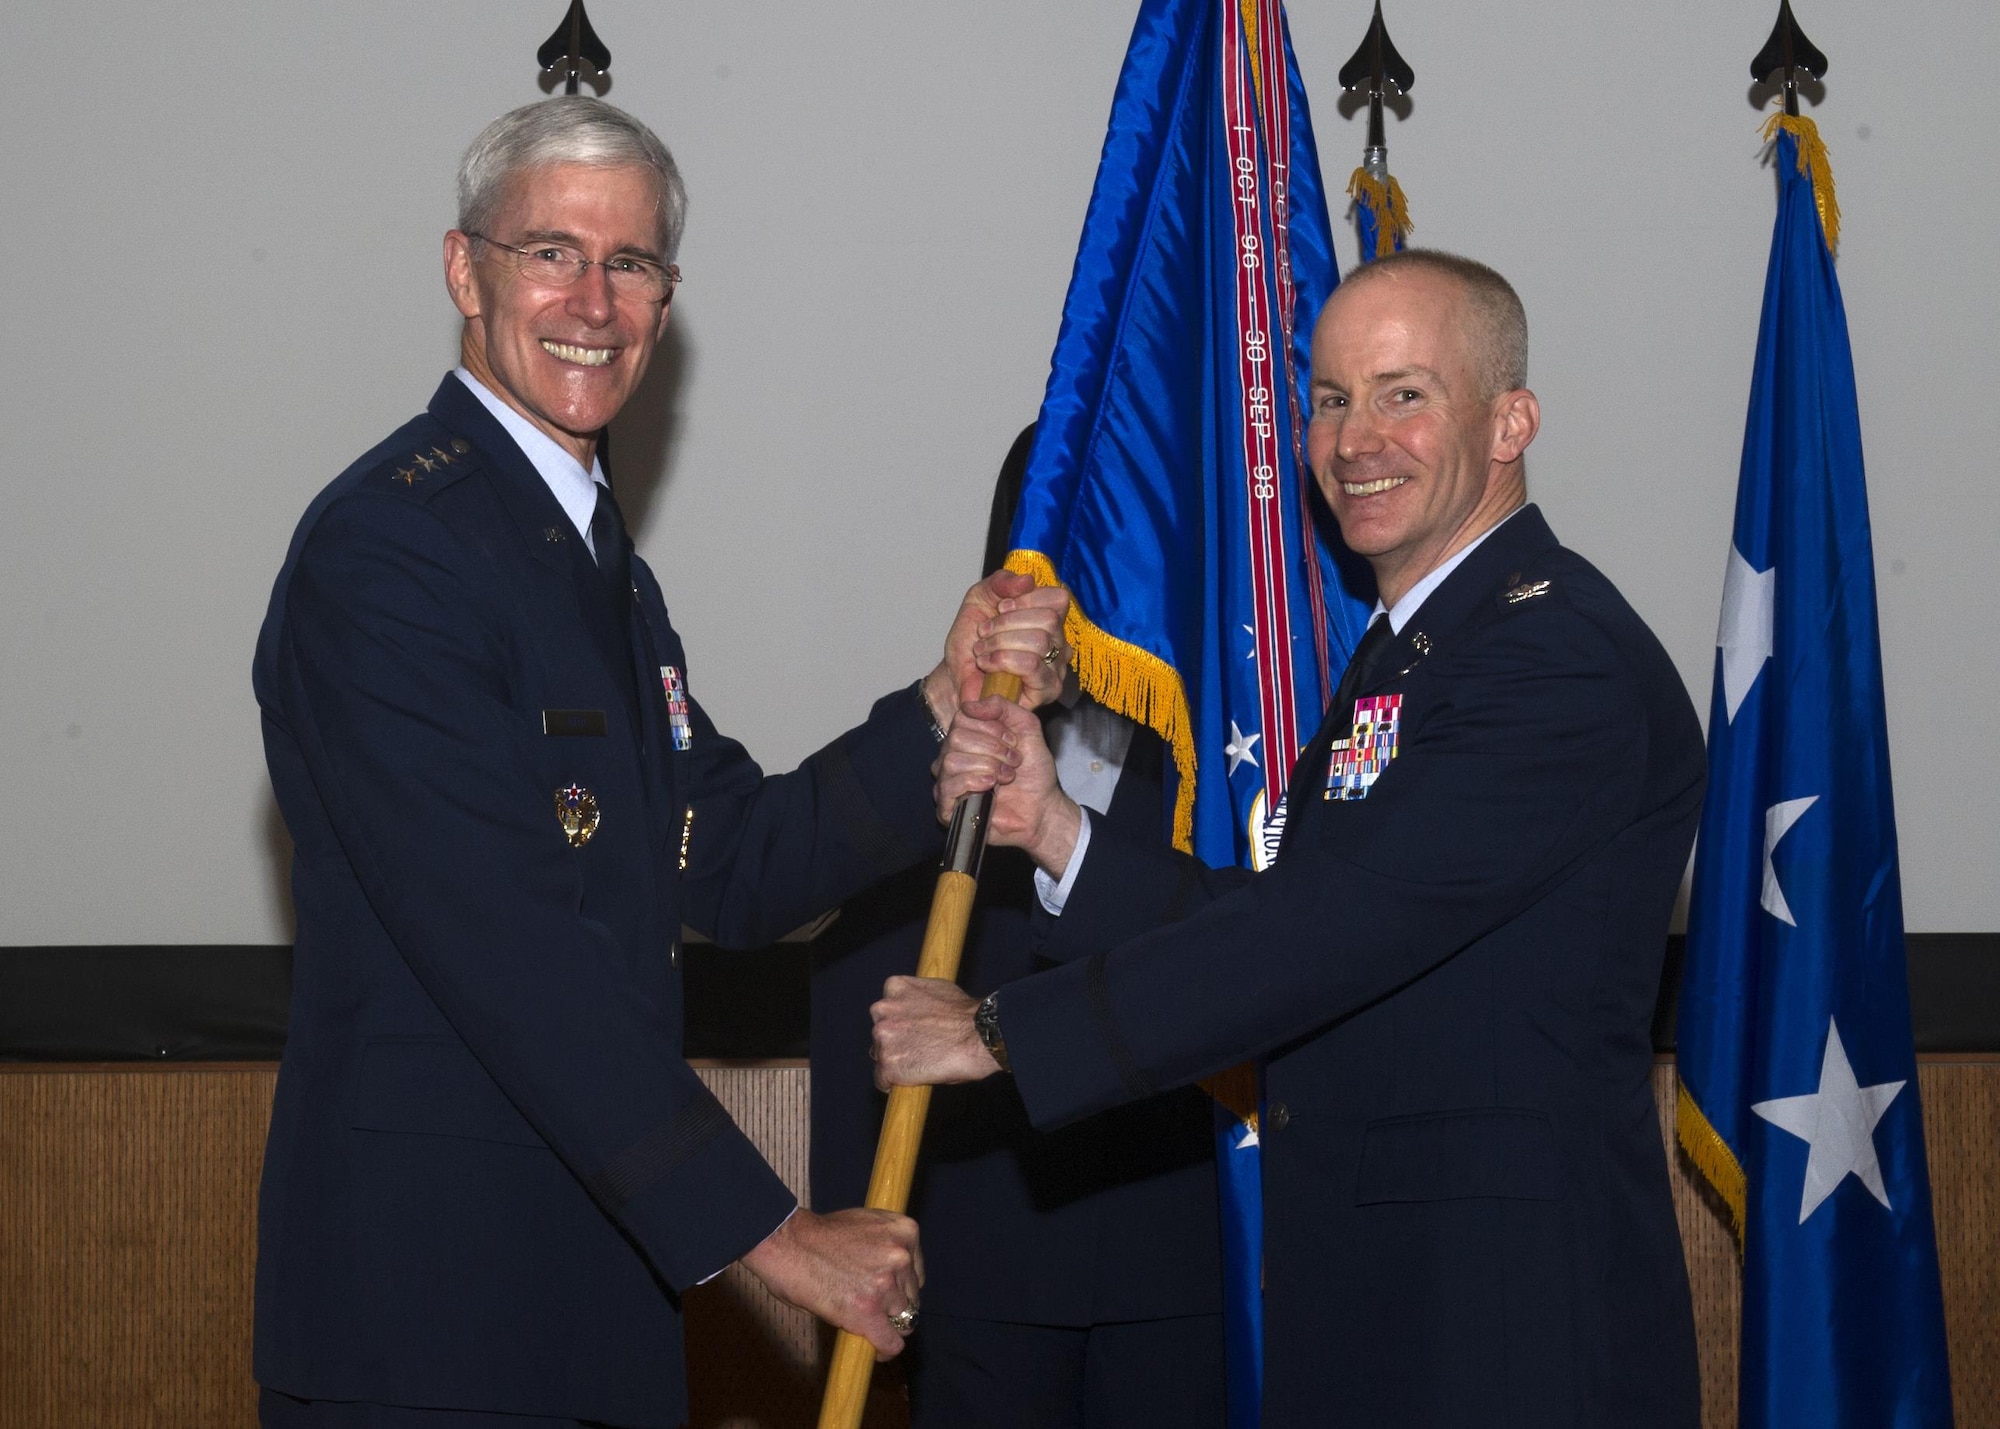 Lt. Gen. Robert P. Otto, Air Force’s Deputy Chief of Staff for Intelligence, Surveillance, and Reconnaissance, passes the National Air and Space Intelligence Center’s guidon to Col. Sean P. Larkin, NASIC commander, during the center’s change of command ceremony at Wright-Patterson Air Force Base, Ohio, May 26. Hundreds of NASIC personnel attended the ceremony and watched as Larkin became the Center’s newest commander. (U.S. Air Force photo/Senior Airman Matthew Lotz)